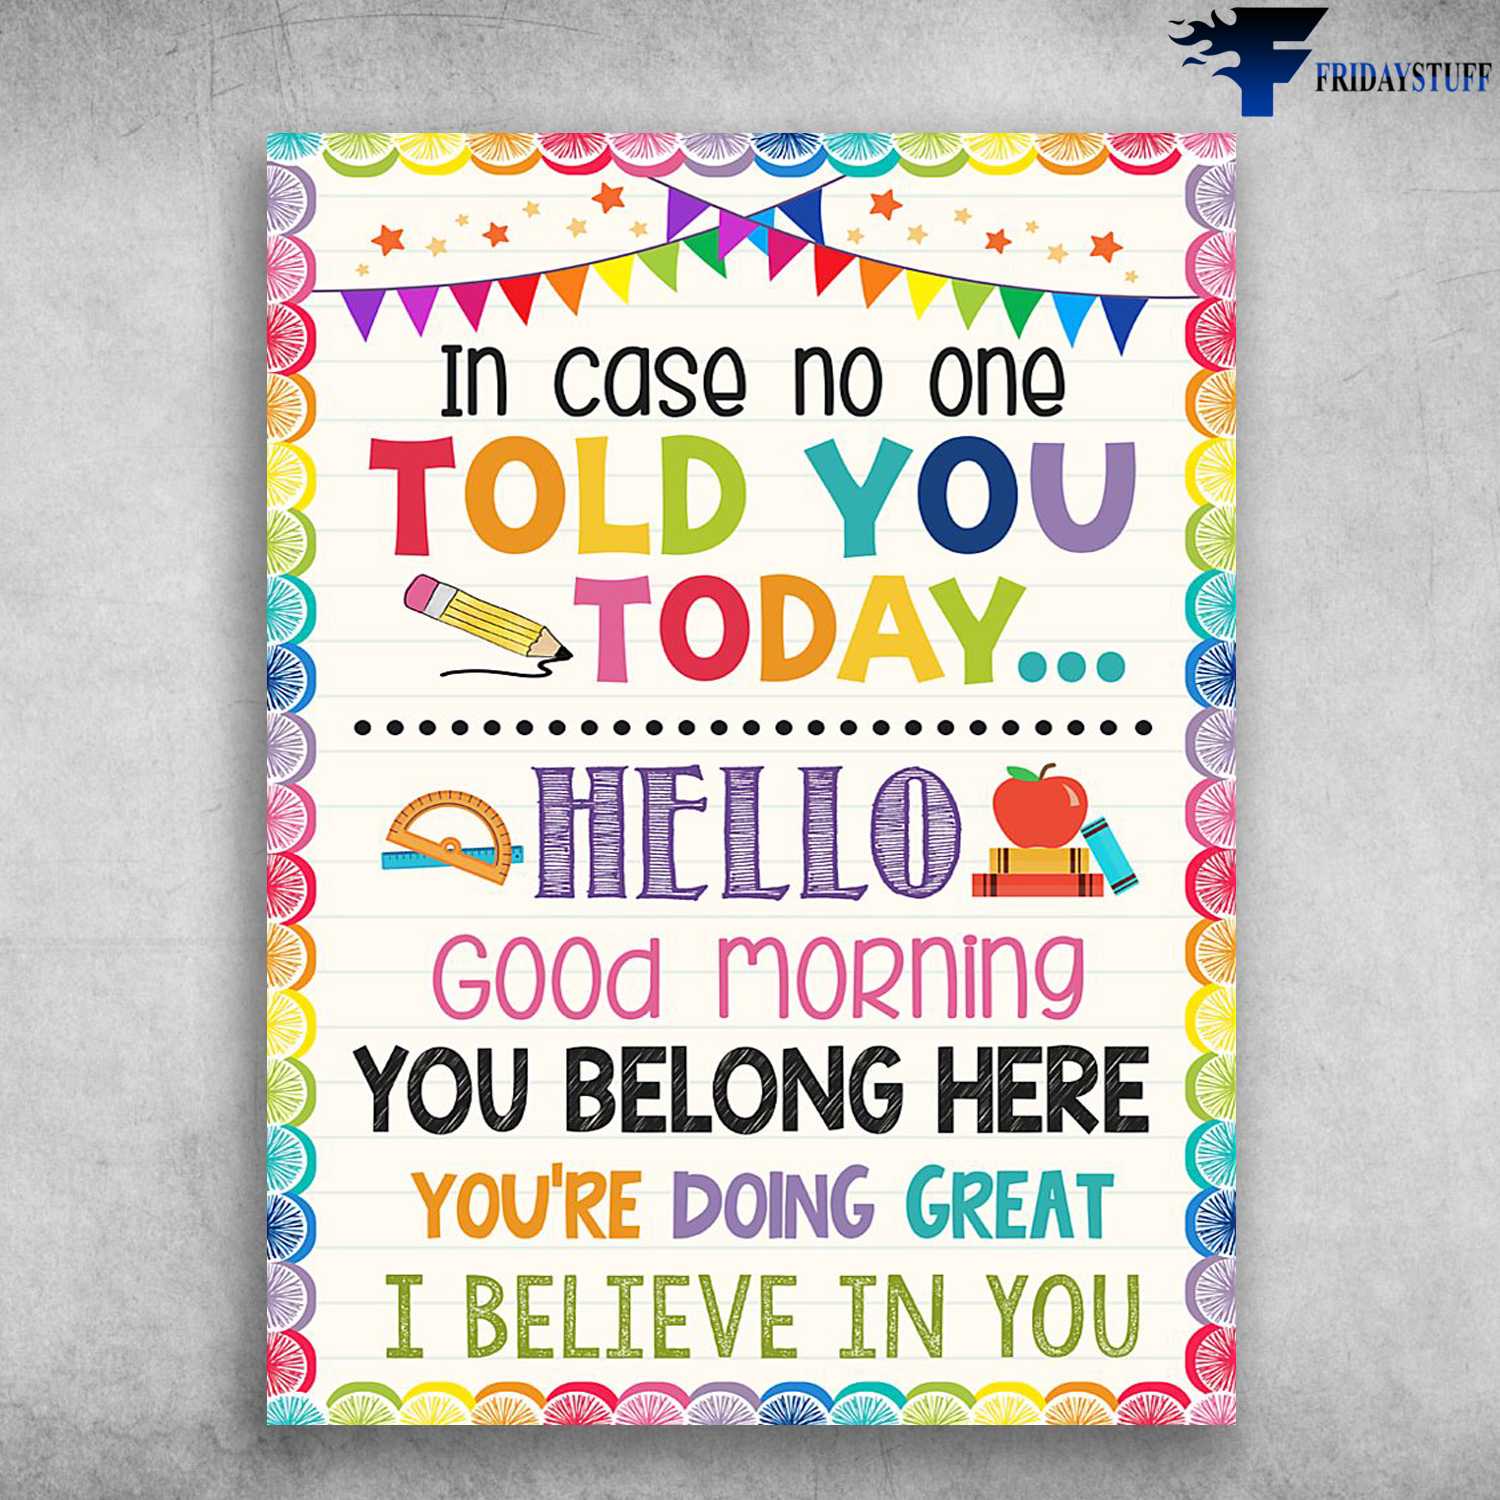 Classroom Poster - In Case No One Told You Today, Hello Good Morning, You Belong Here, You're Doing Great, I Believe In You